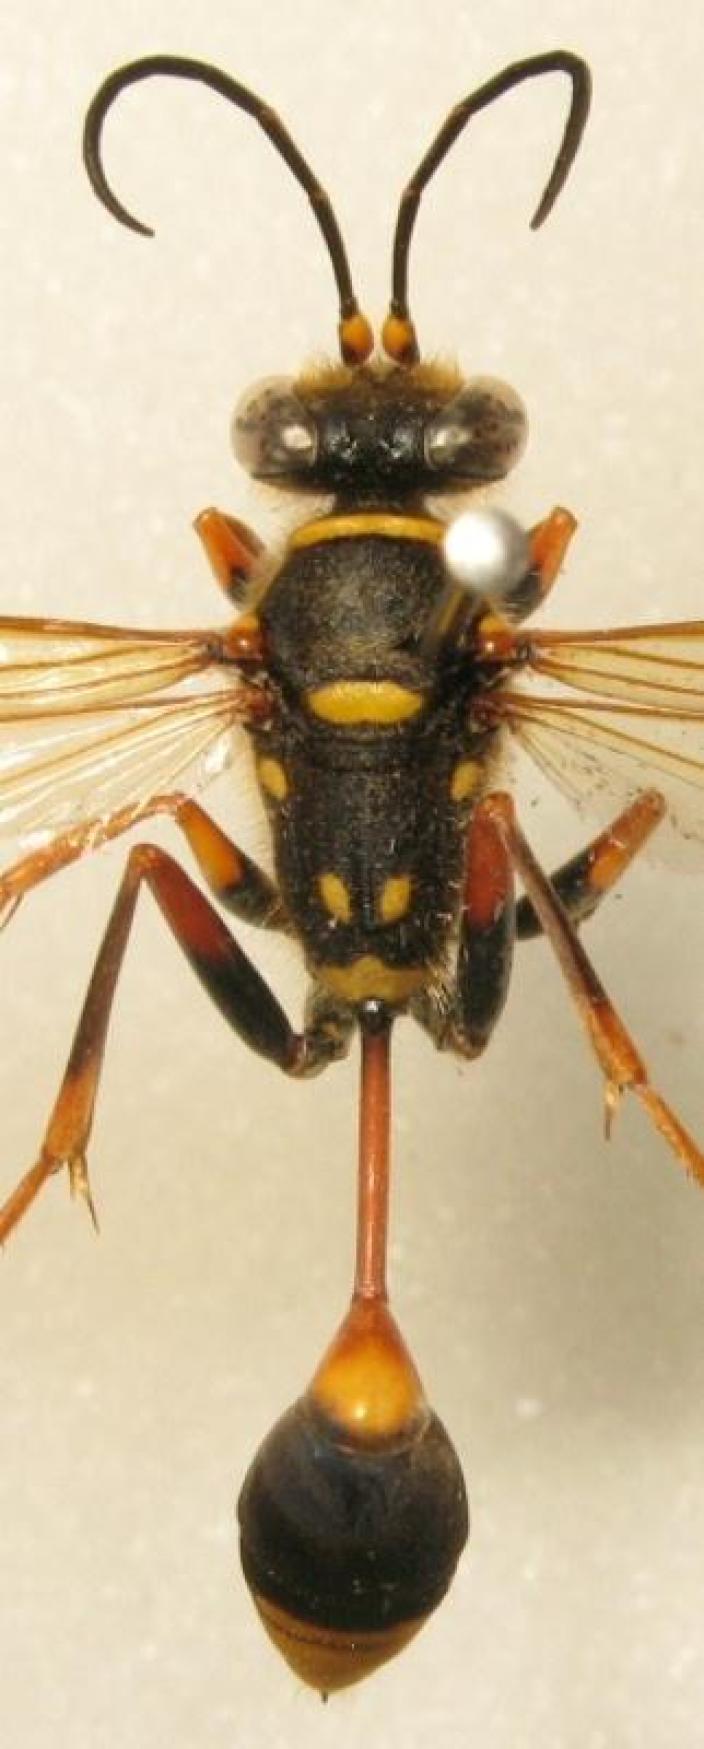 View of a mounted wasp specimen